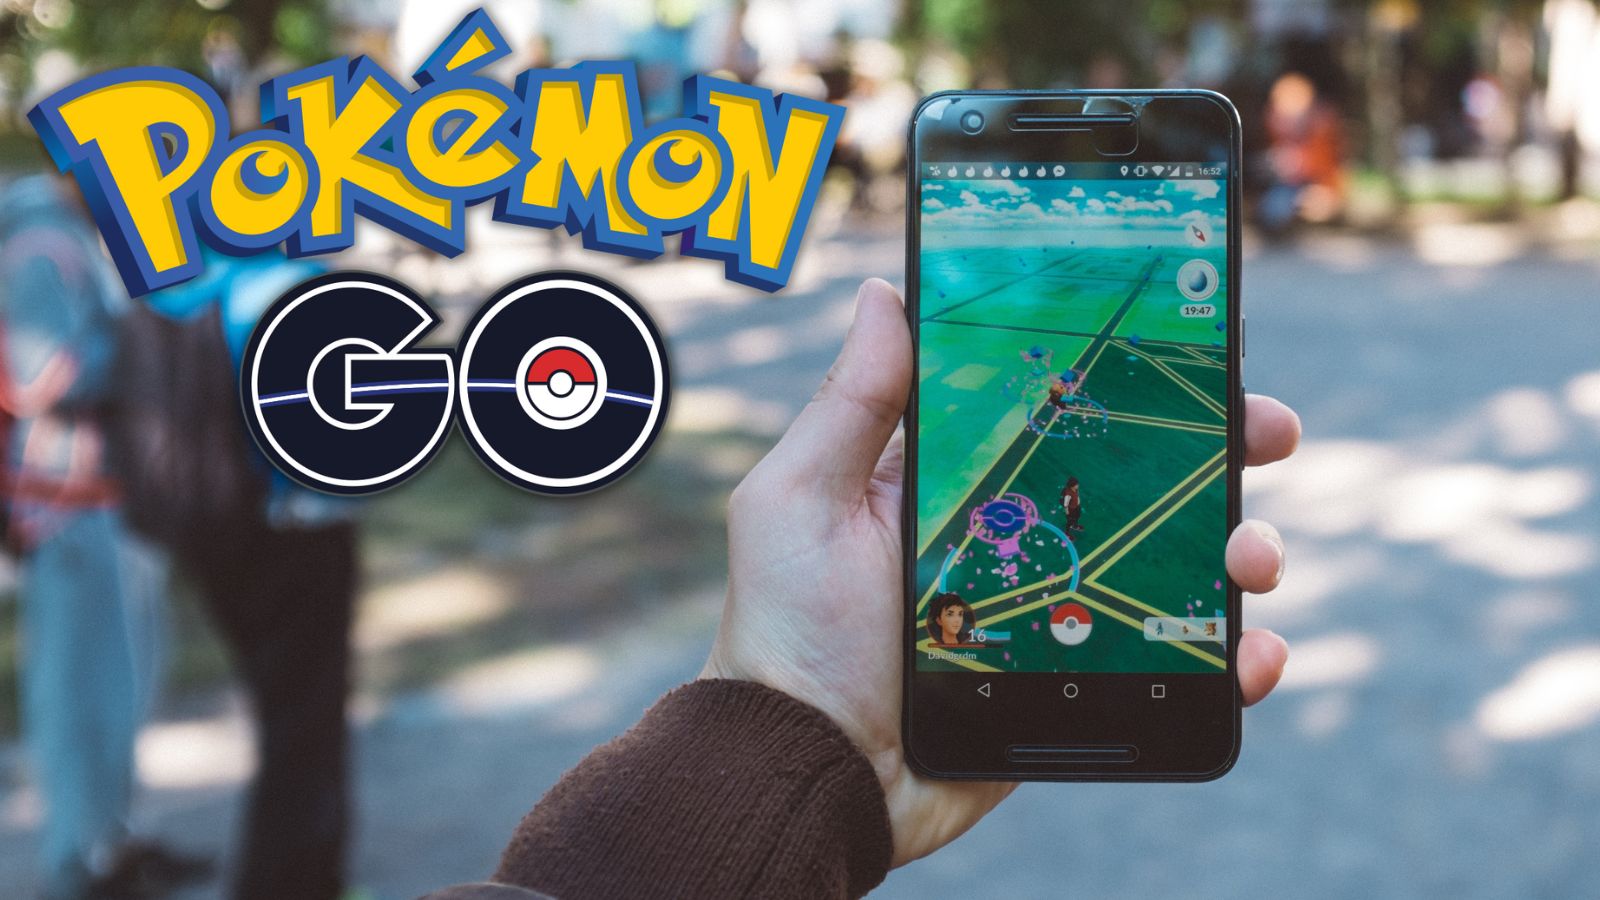 Pokemon Go players clown Niantic for breaking TOS in ad – Dexerto